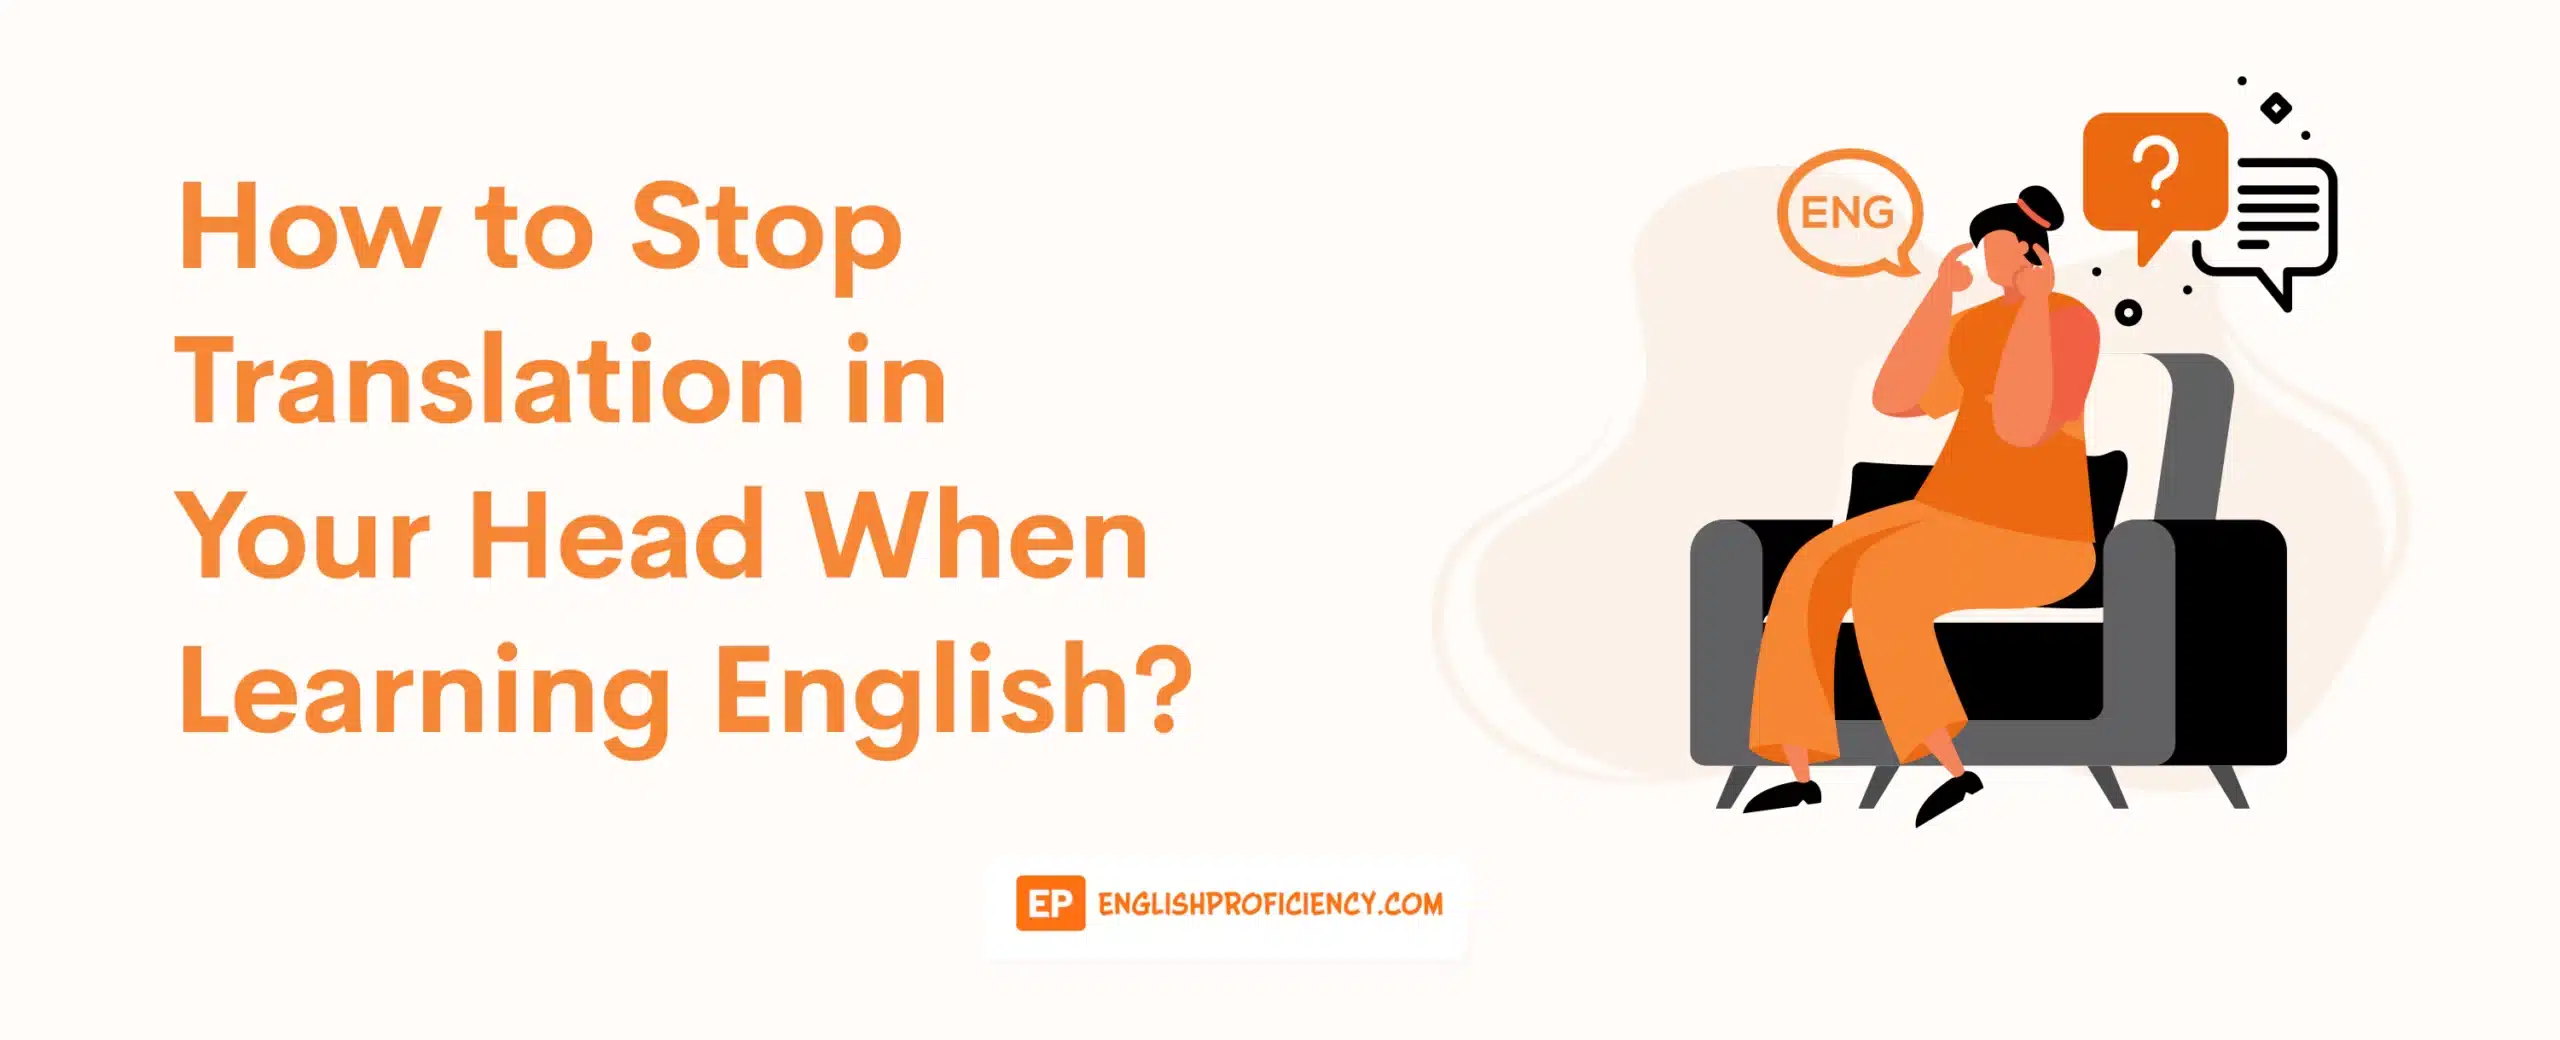 How to Stop Translation in Your Head When Learning English